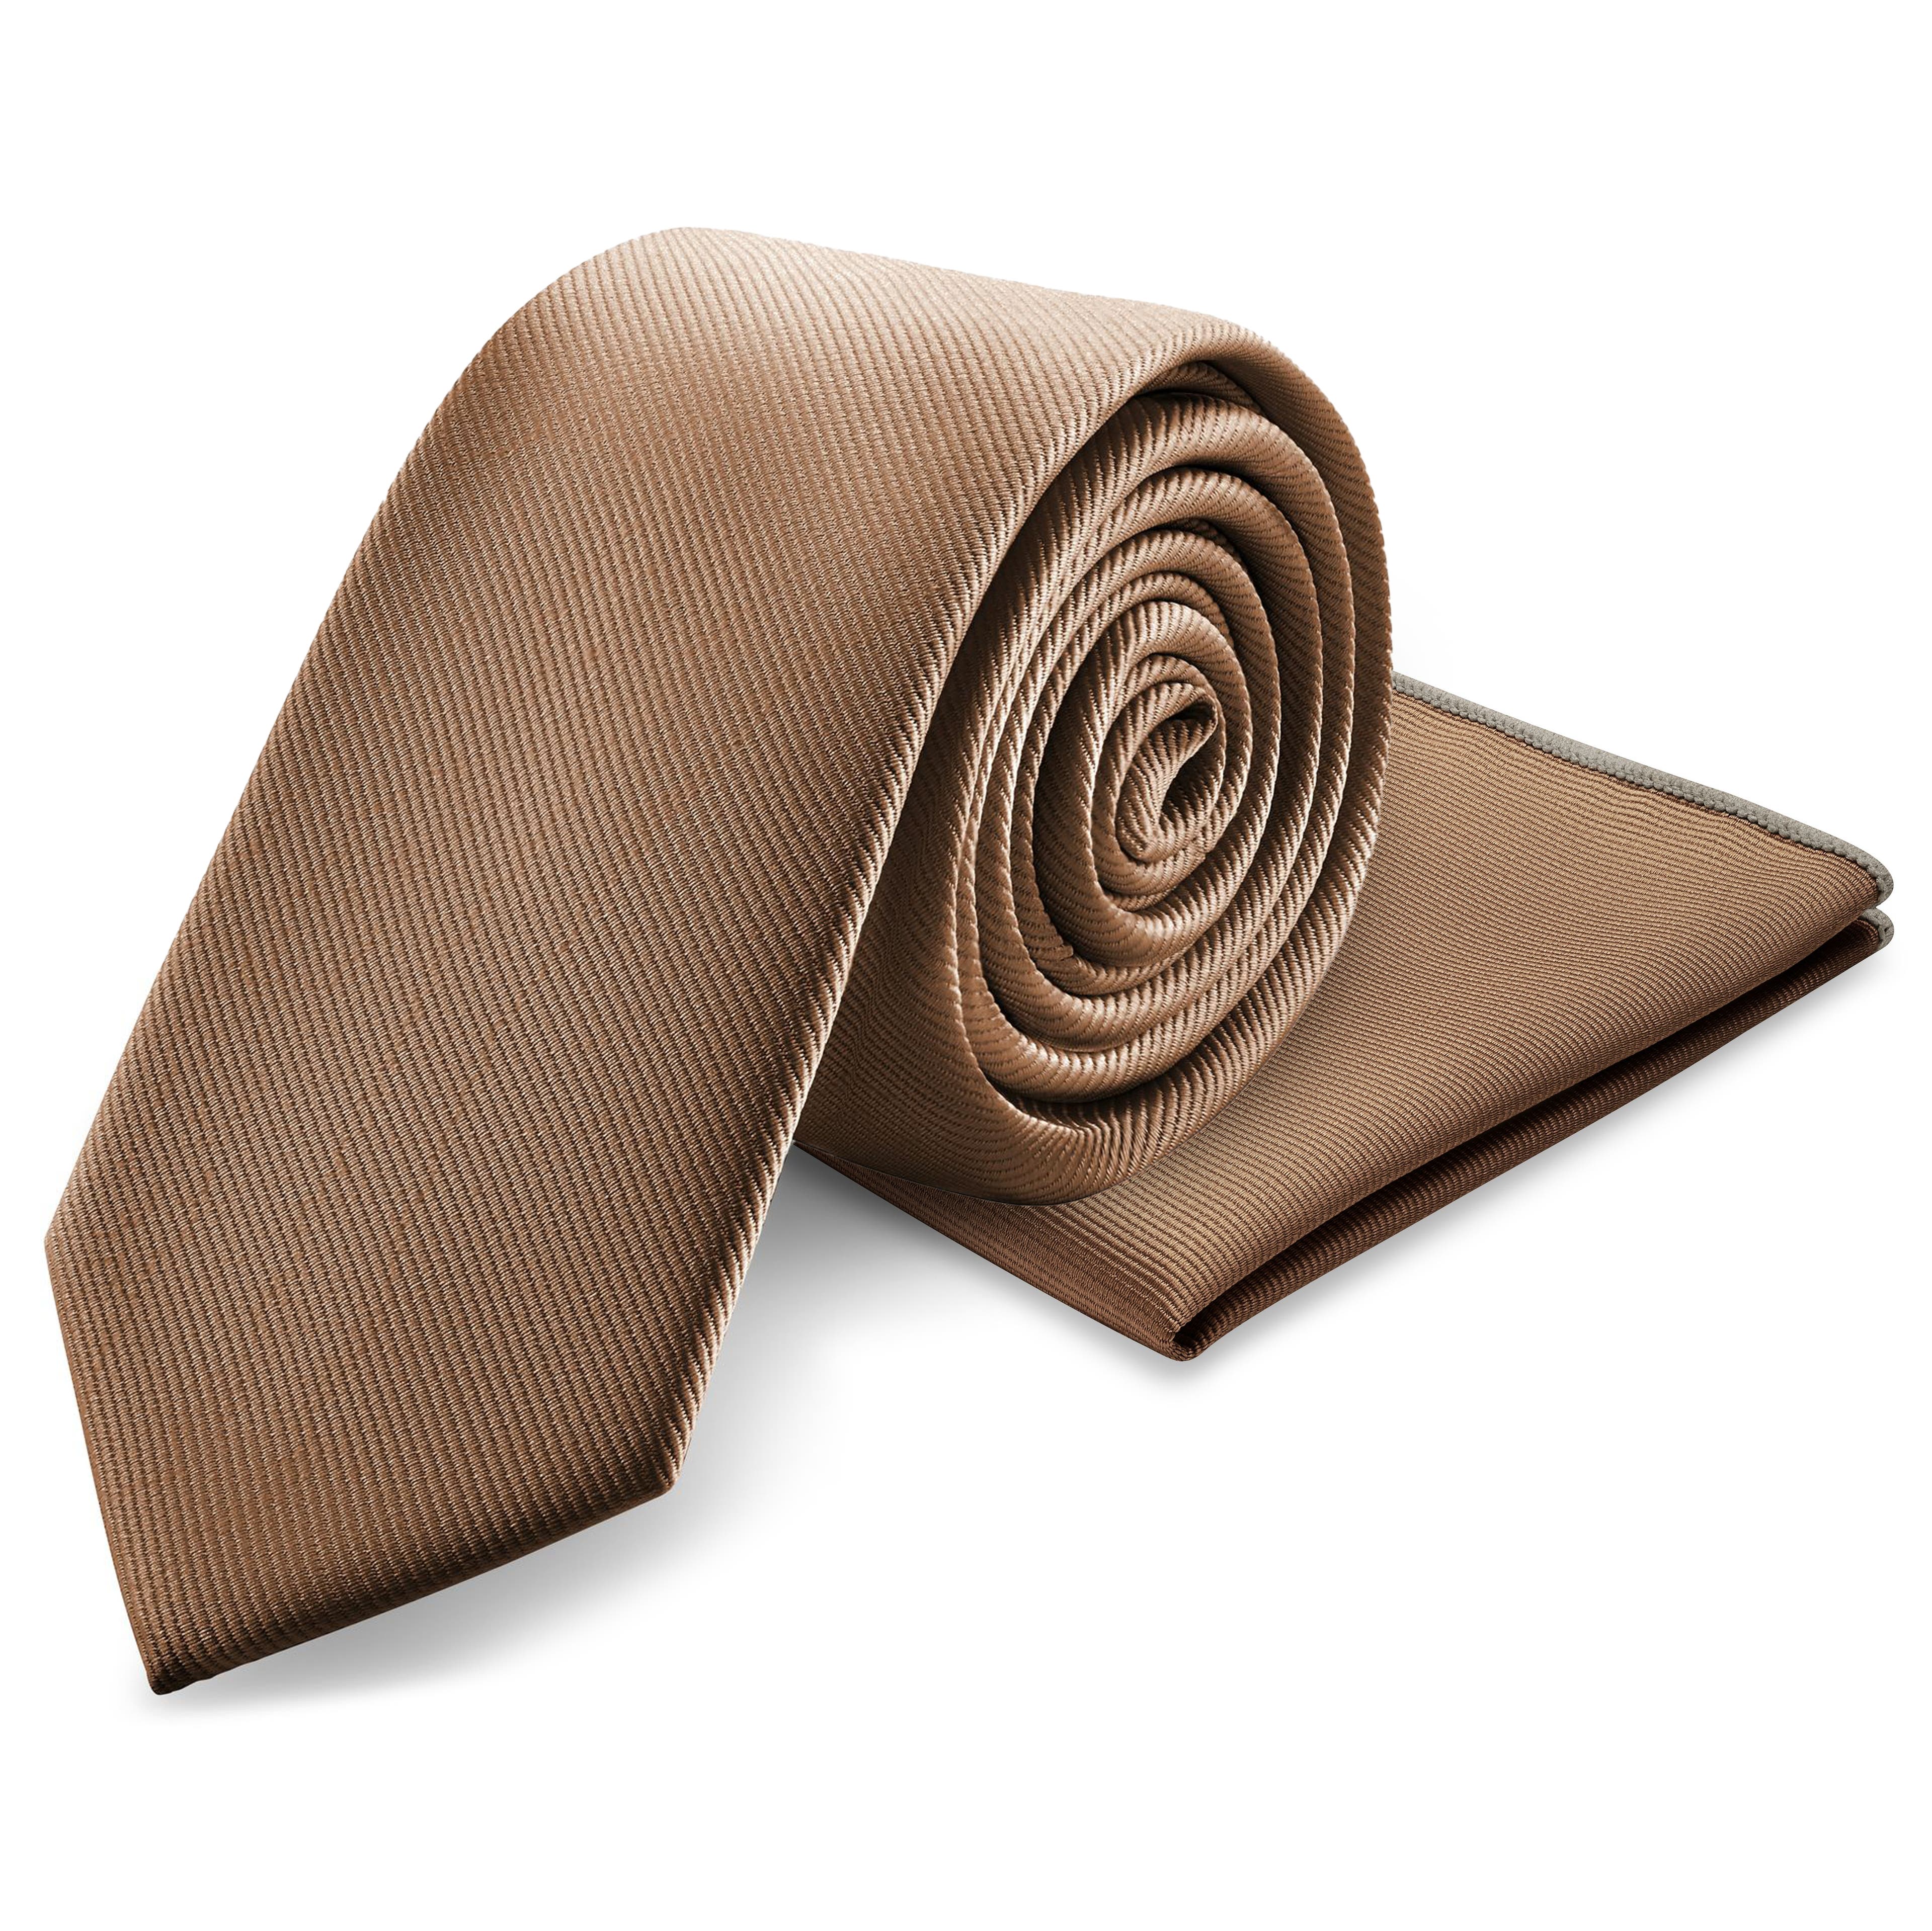 Tan Necktie and Pocket Square